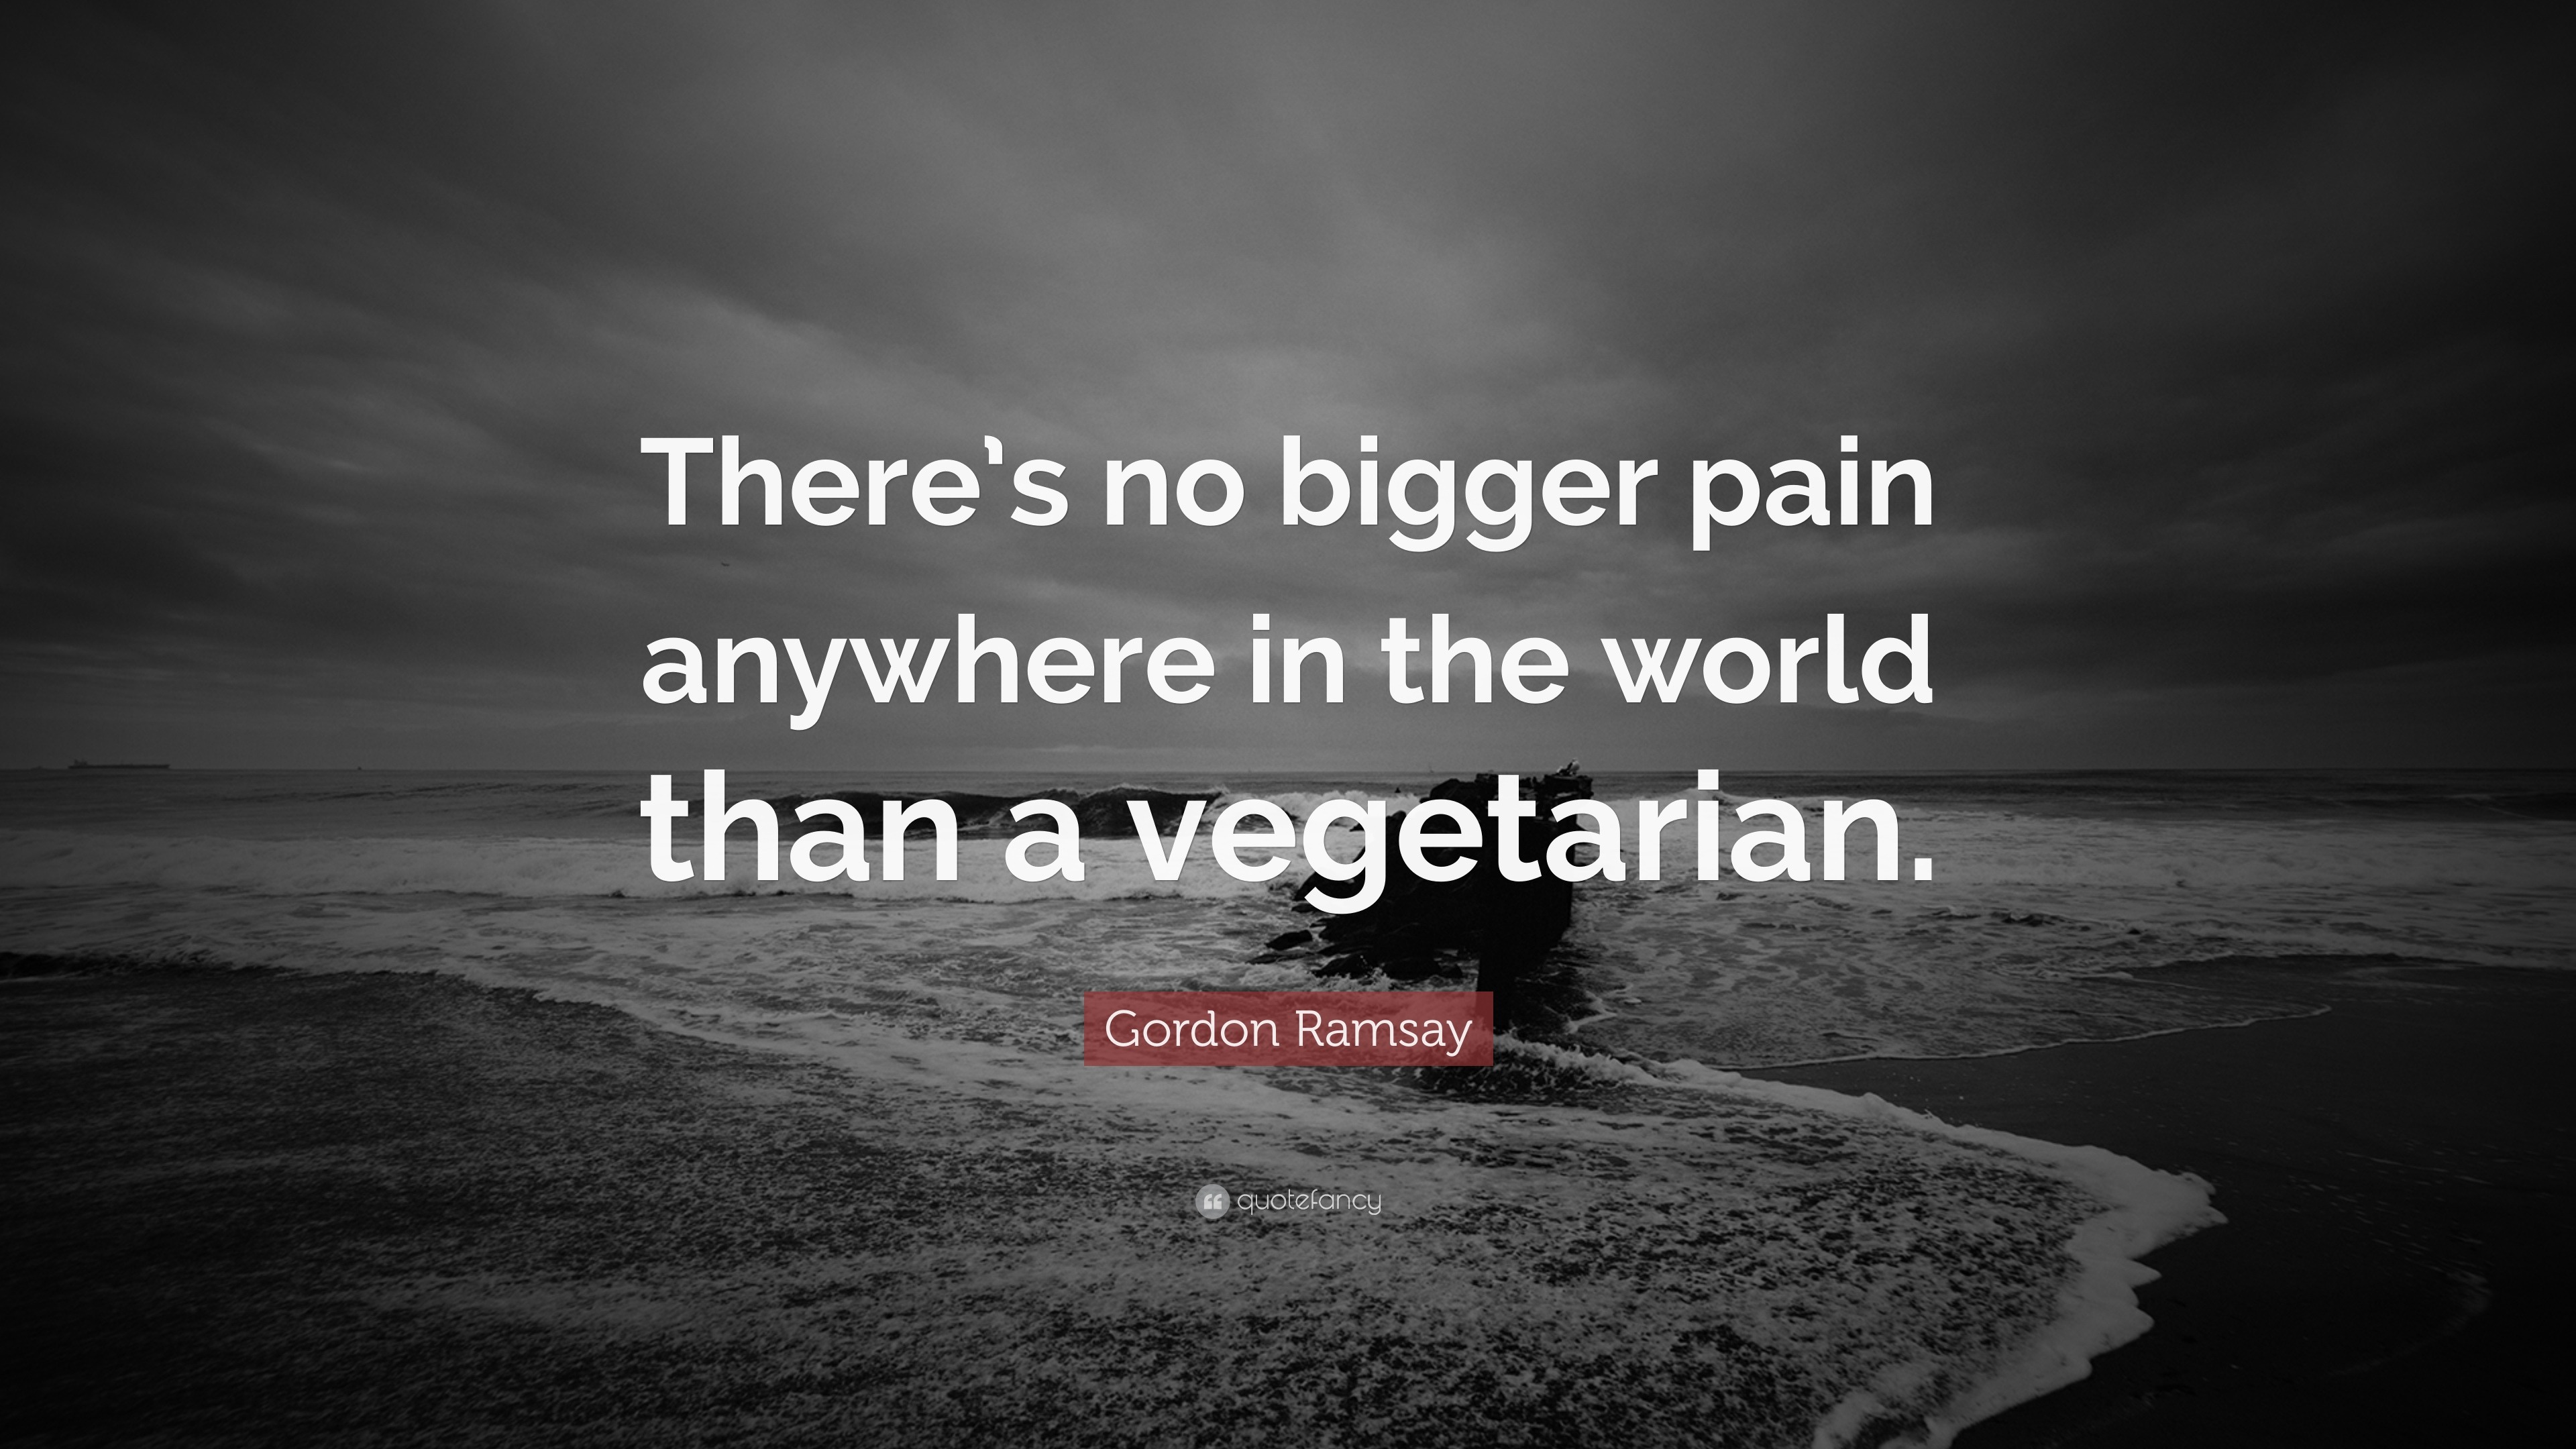 Gordon Ramsay Quote: “There's no bigger pain anywhere in the world than a  vegetarian.”